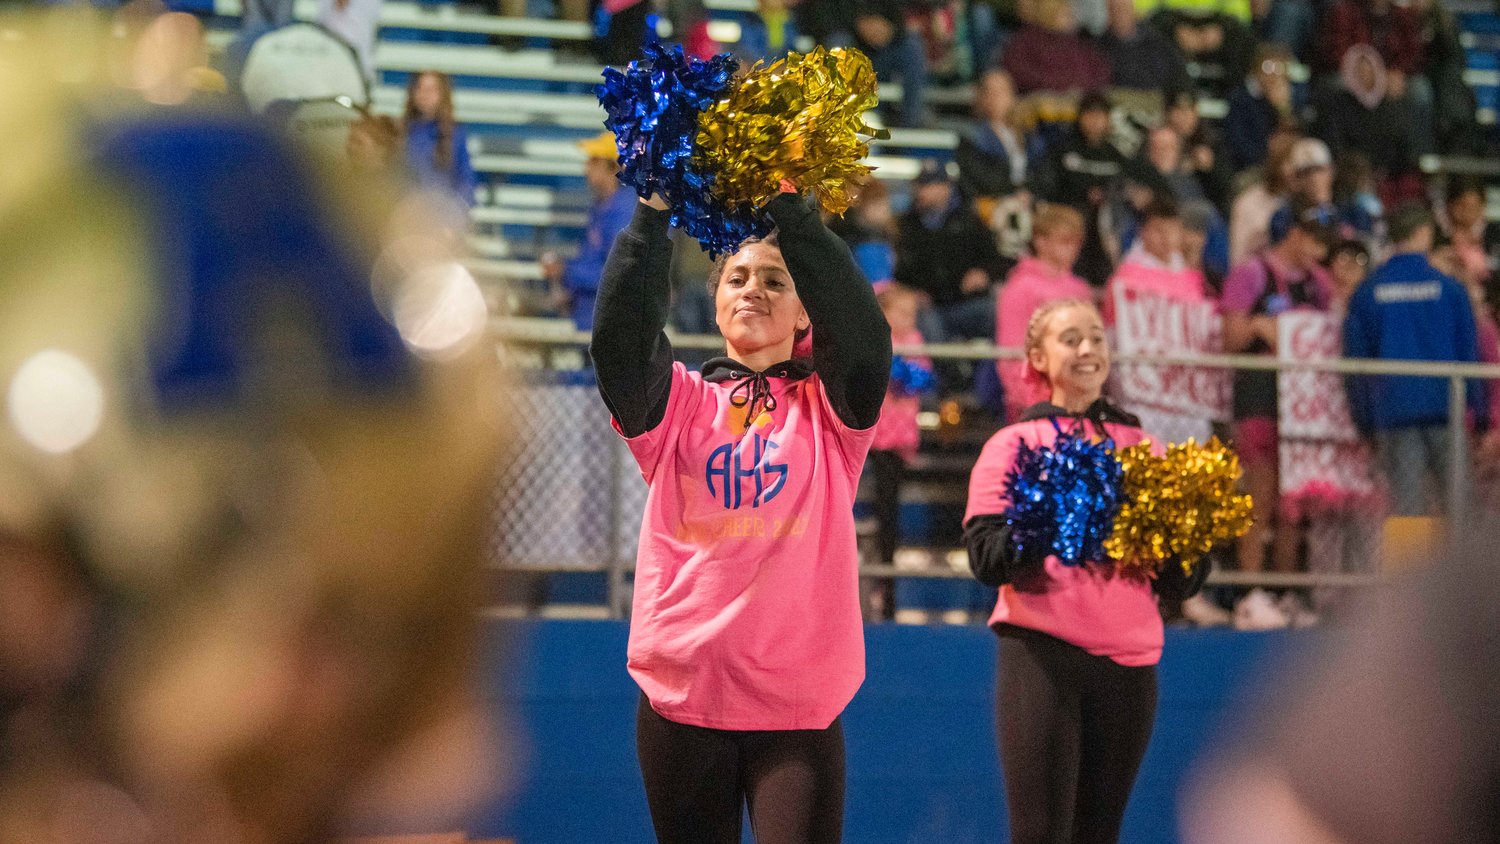 Adna cheerleaders wave their pom-poms during a Thursday night game at Pirate Stadium.